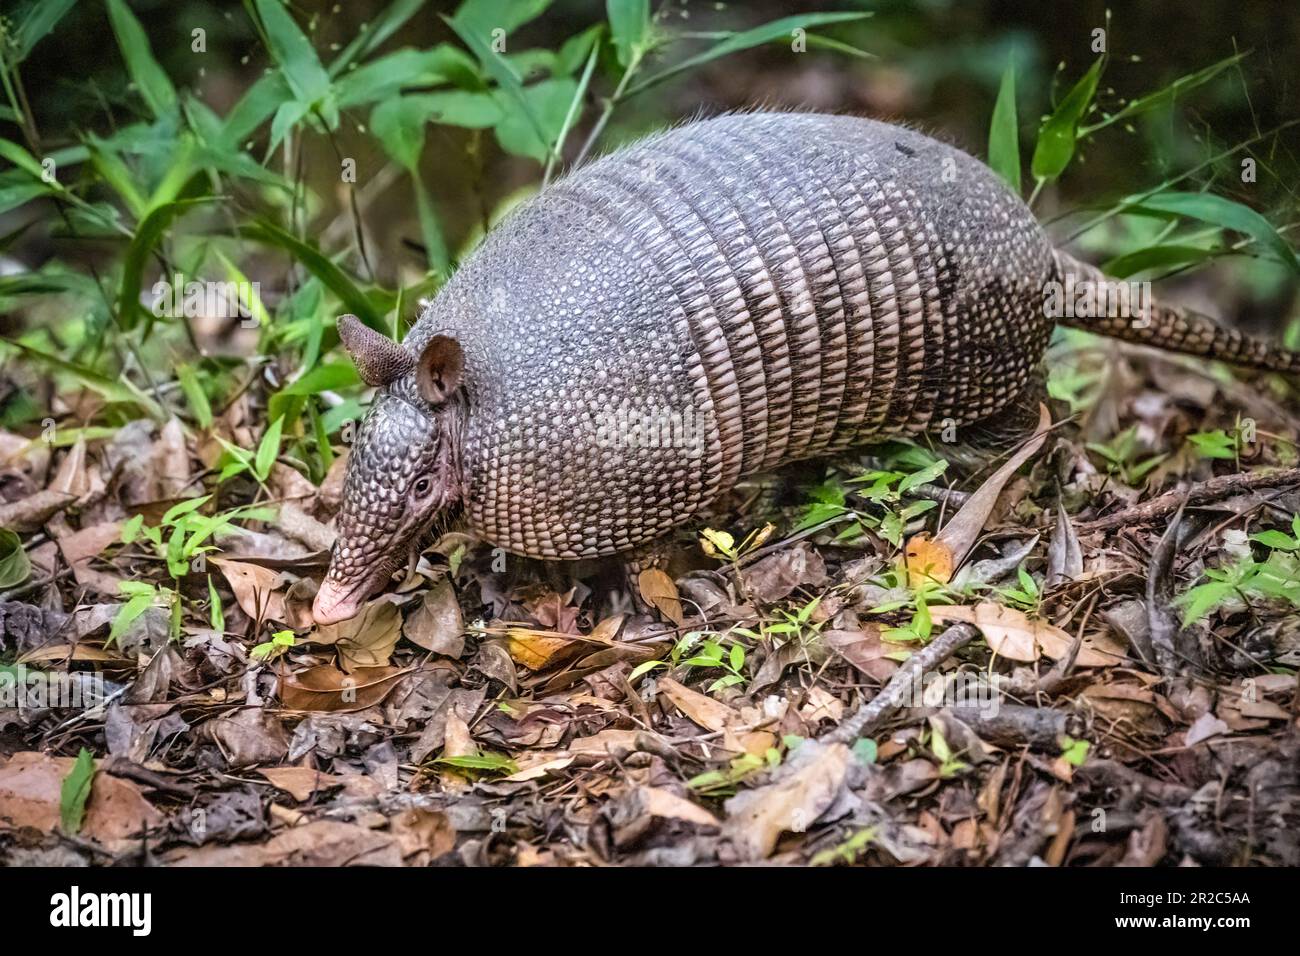 Nine-banded armadillo (Dasypus novemcinctus), also known as a common long-nosed armadillo, at Paynes Prairie Preserve State Park in Florida. (USA) Stock Photo